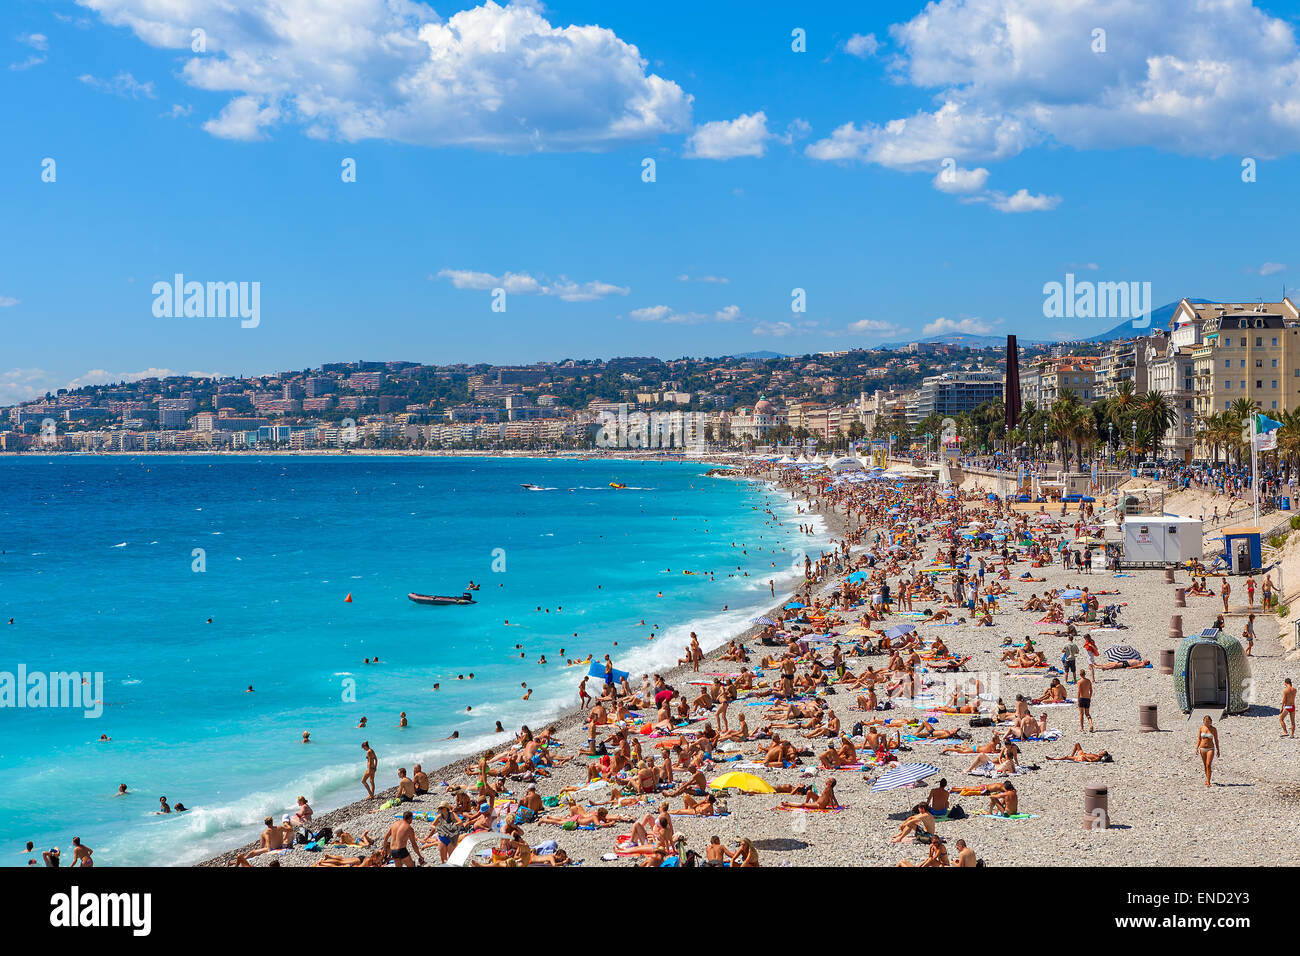 People on beach along seashore and Promenade des Anglais in Nie, France. Stock Photo